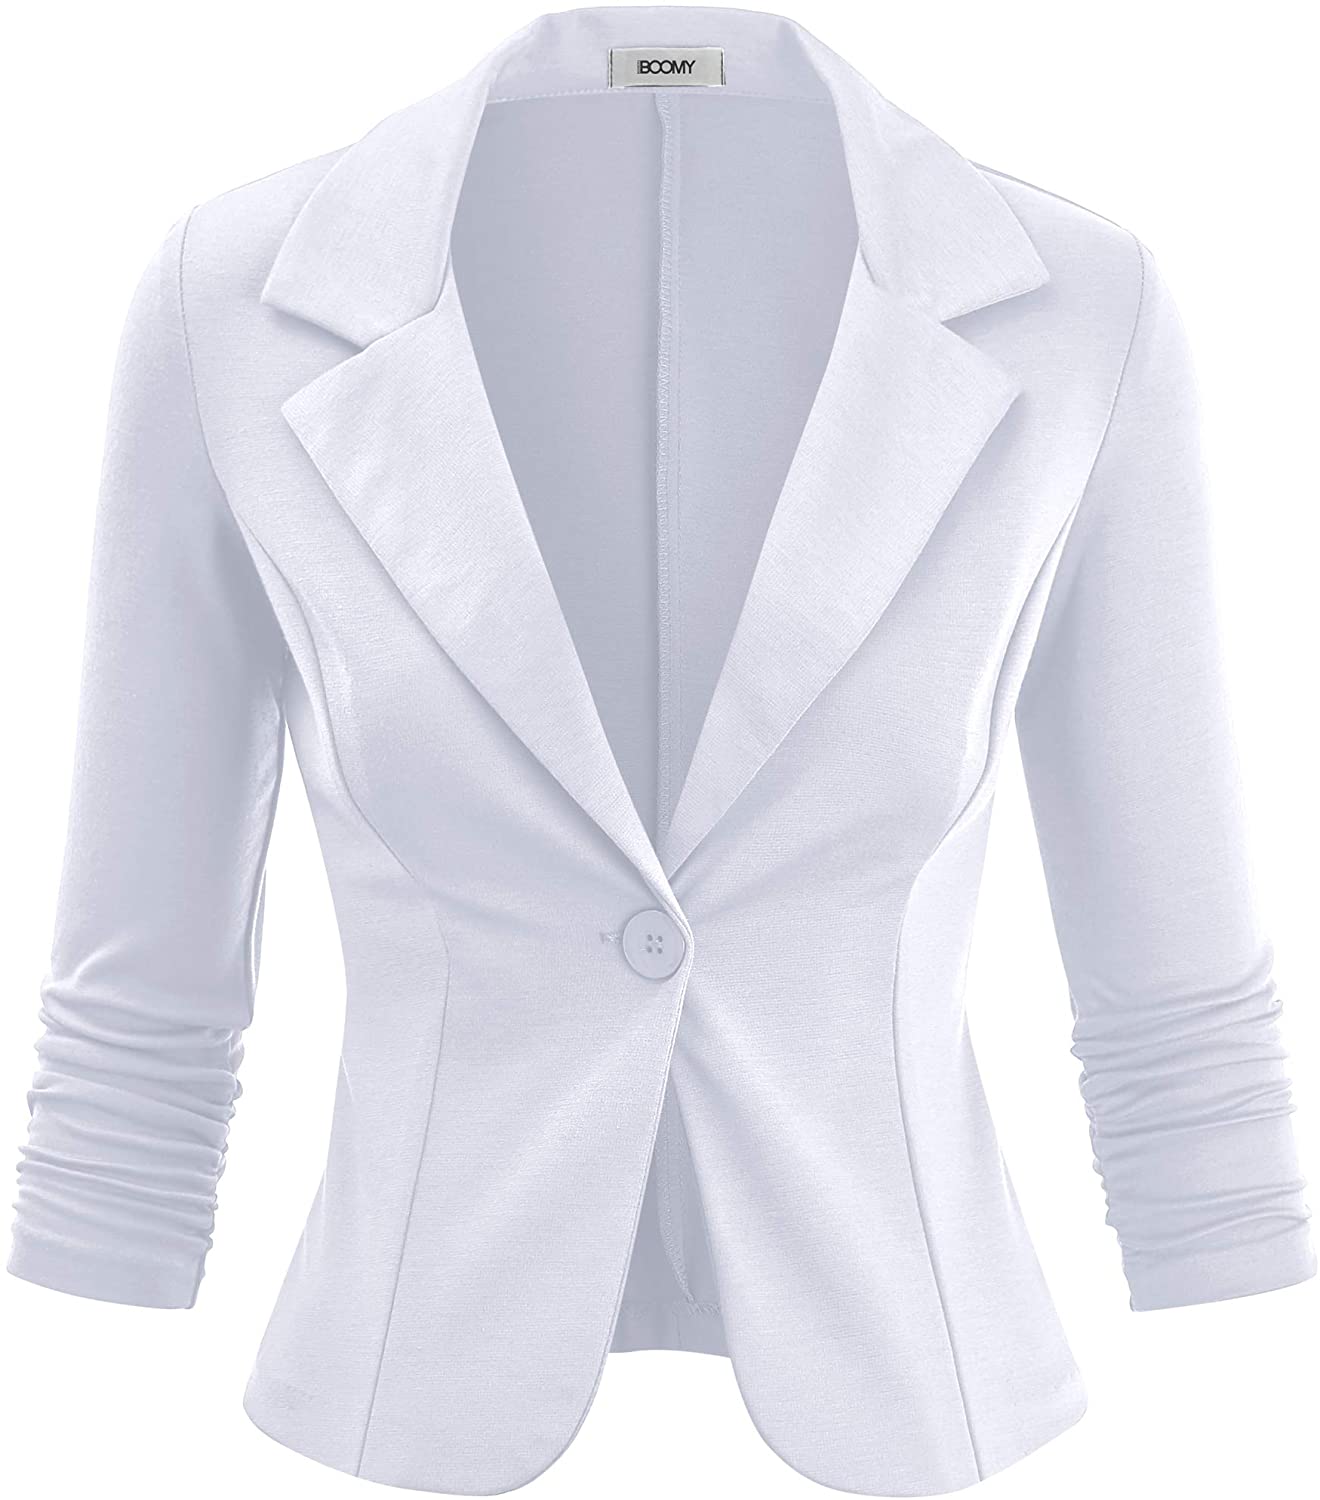 Regular and Plus Sizes FASHION BOOMY Womens Casual Work Office Blazer 3/4 Ruched Sleeve Knit Jacket